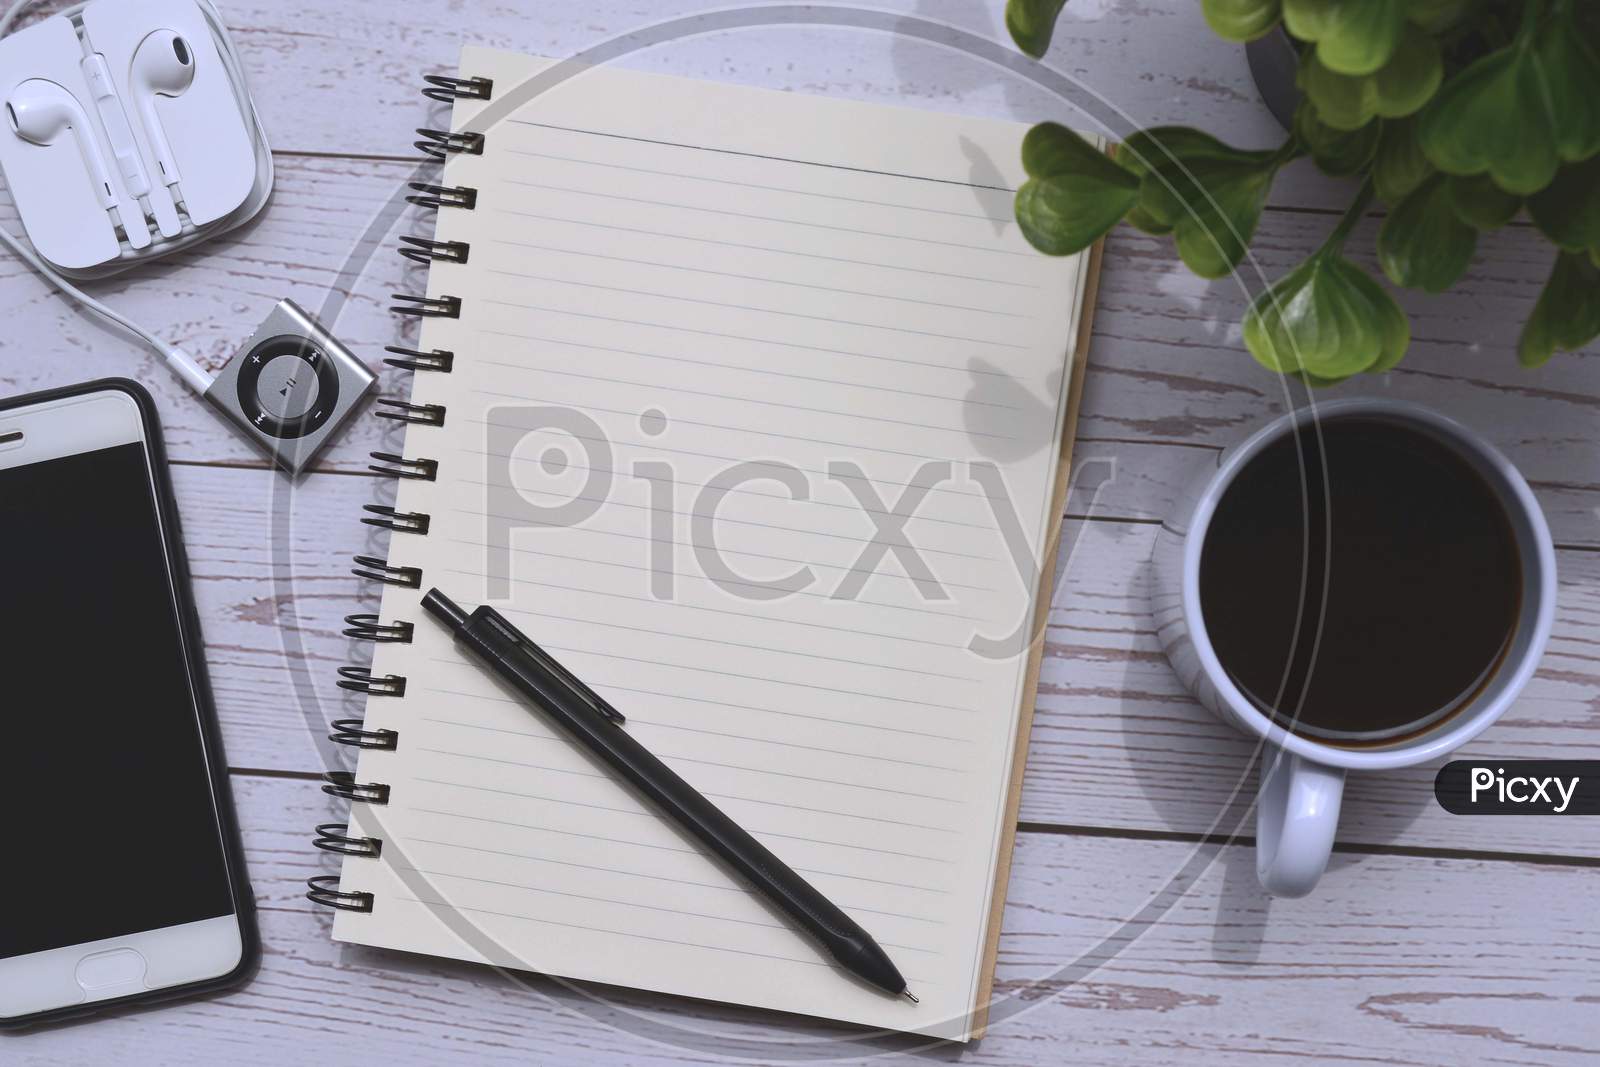 Directly above view of wooden desk with cup of coffee, smart phone, notepad, music player, pen and green leaf background